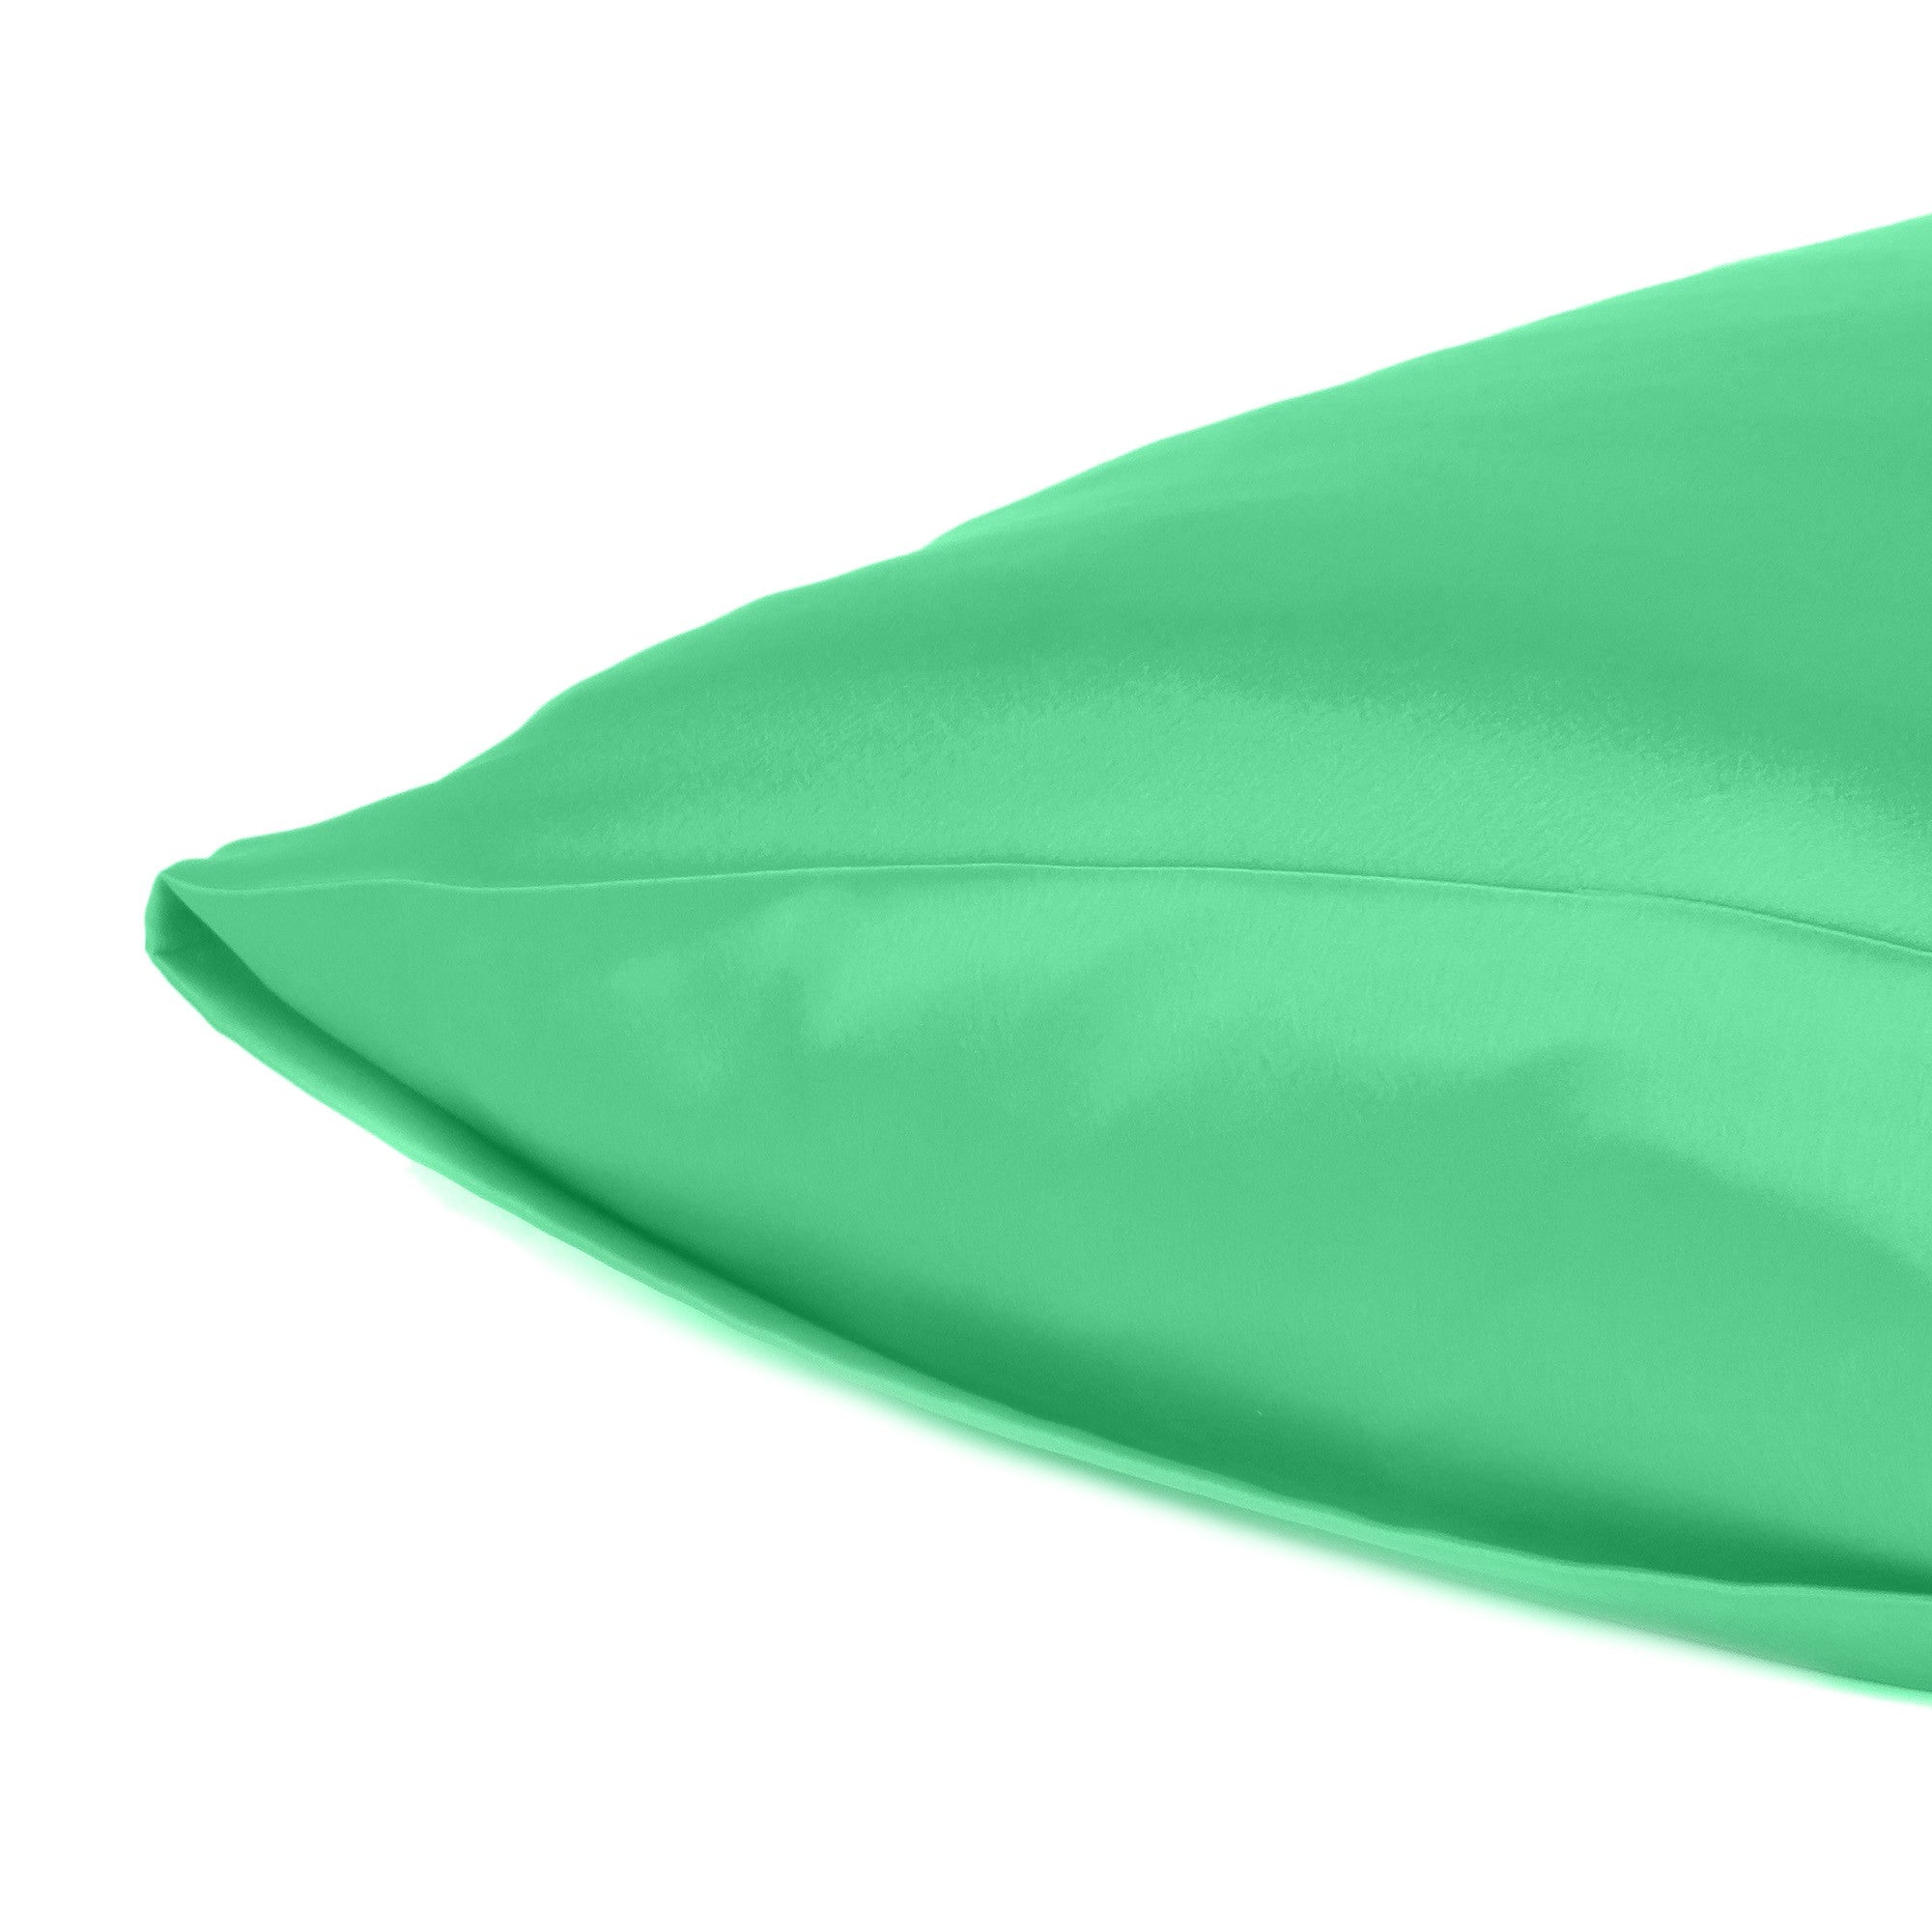 Green Dreamy Set Of 2 Silky Satin Queen Pillowcases - Tuesday Morning-Bed Sheets